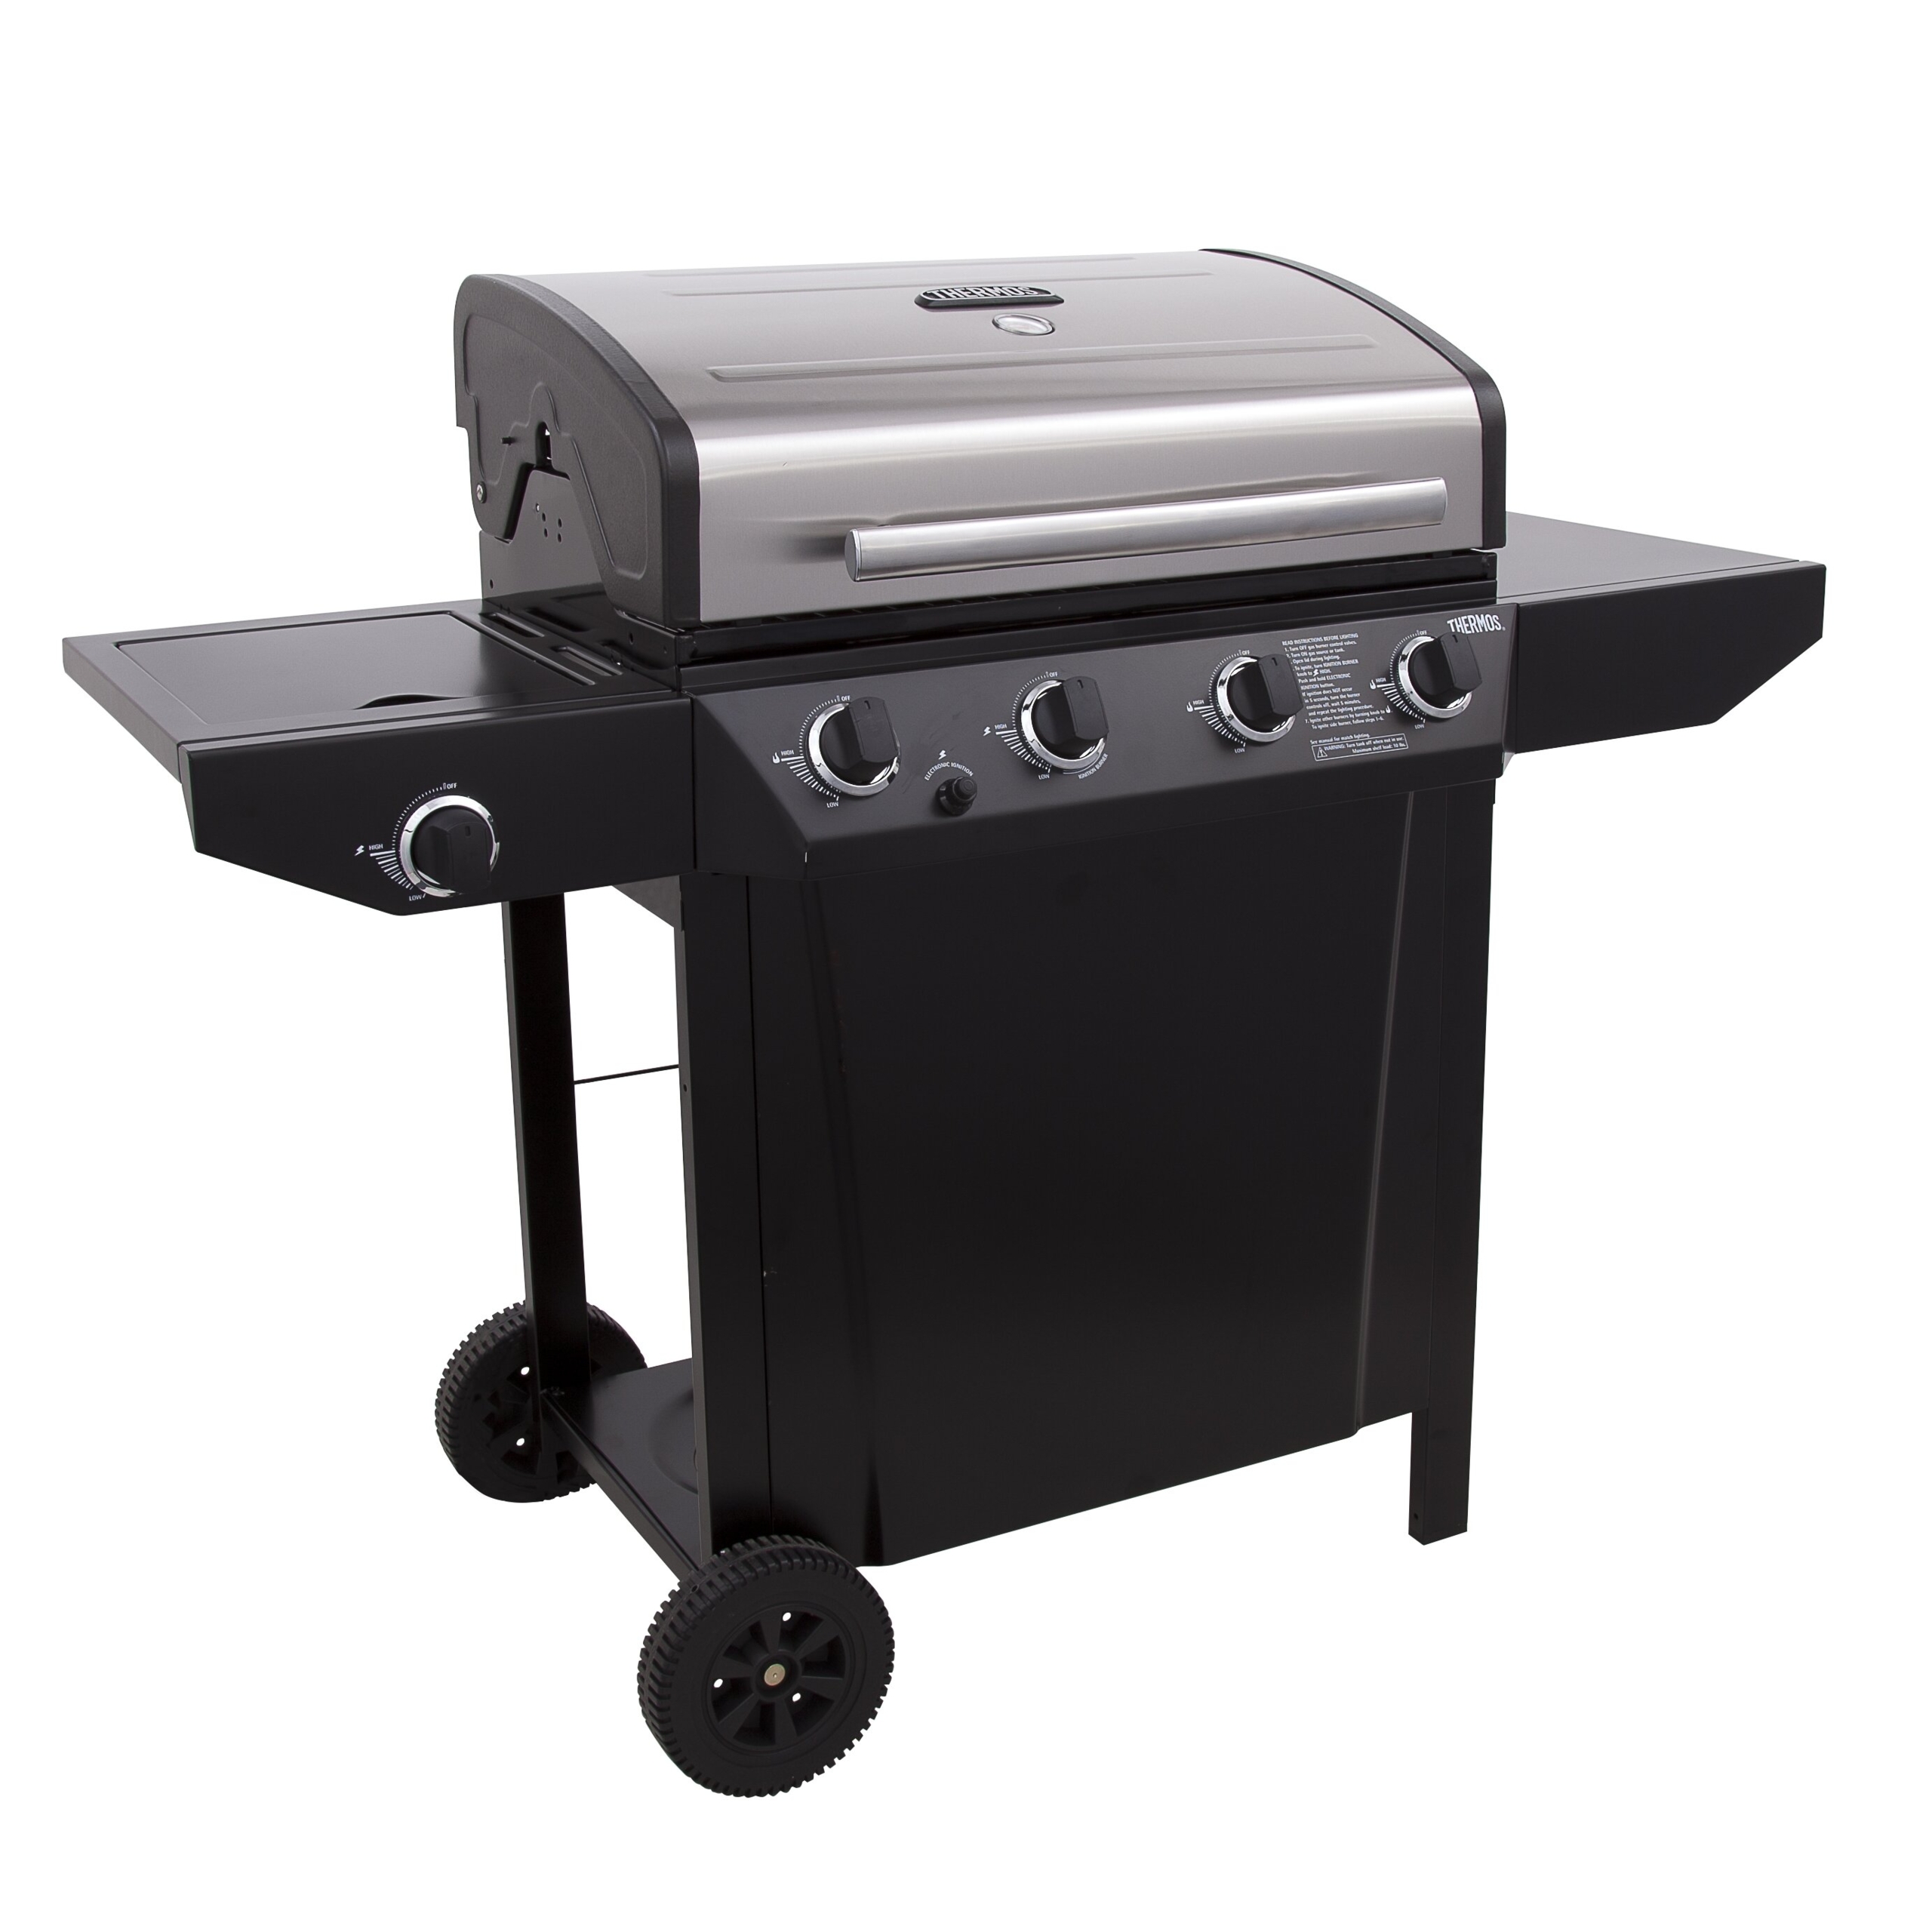 Thermos 4 Burner Gas Grill with Side Burner